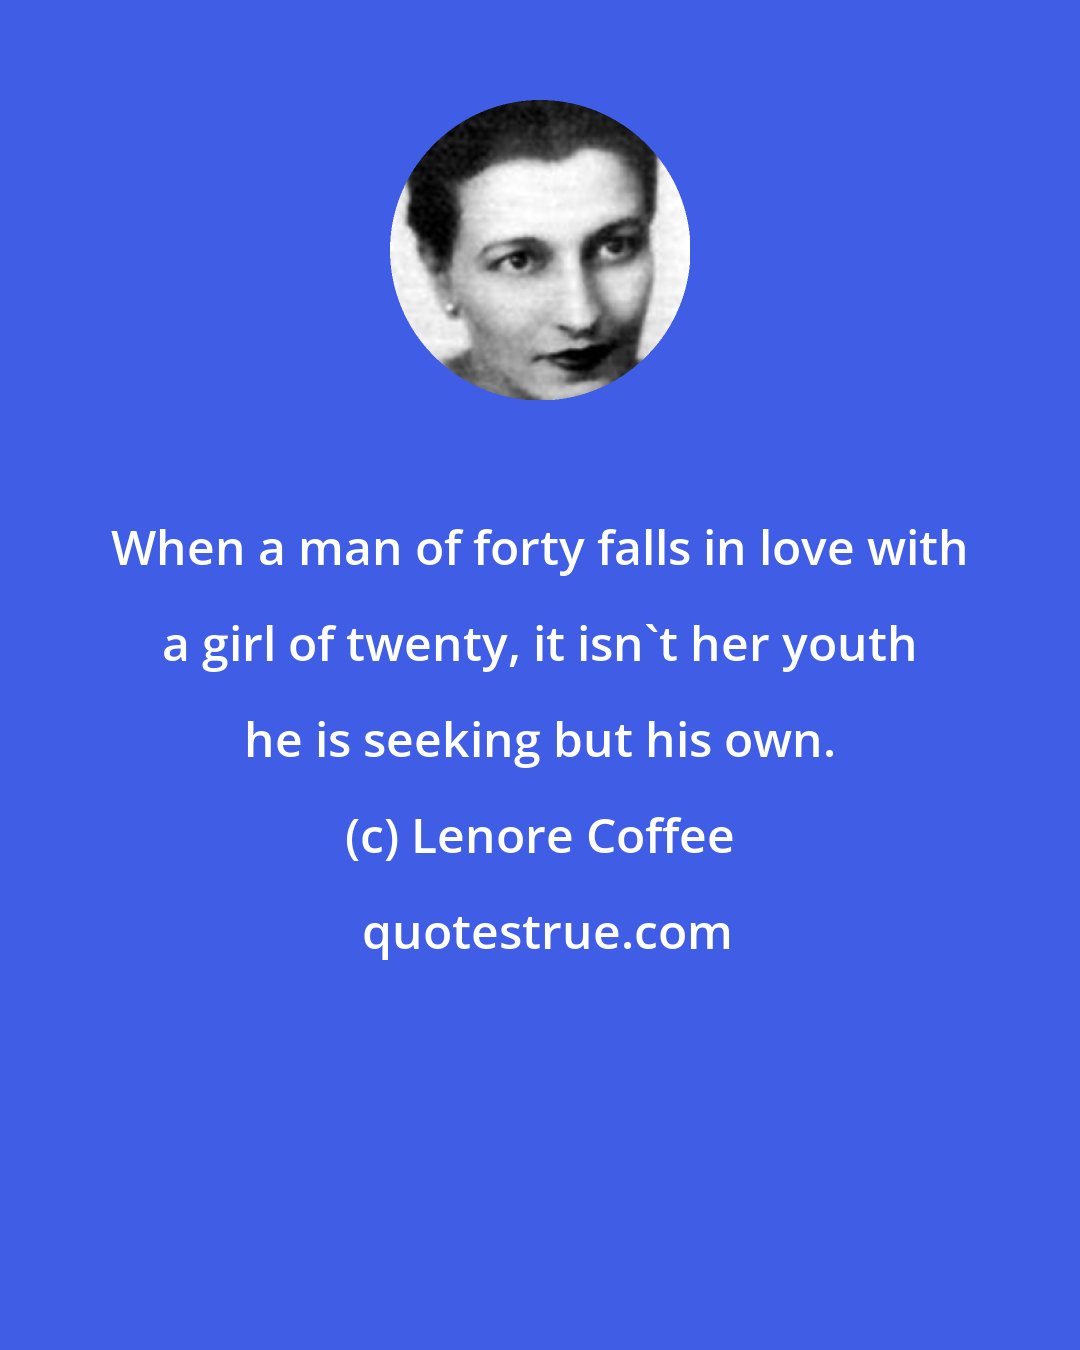 Lenore Coffee: When a man of forty falls in love with a girl of twenty, it isn't her youth he is seeking but his own.